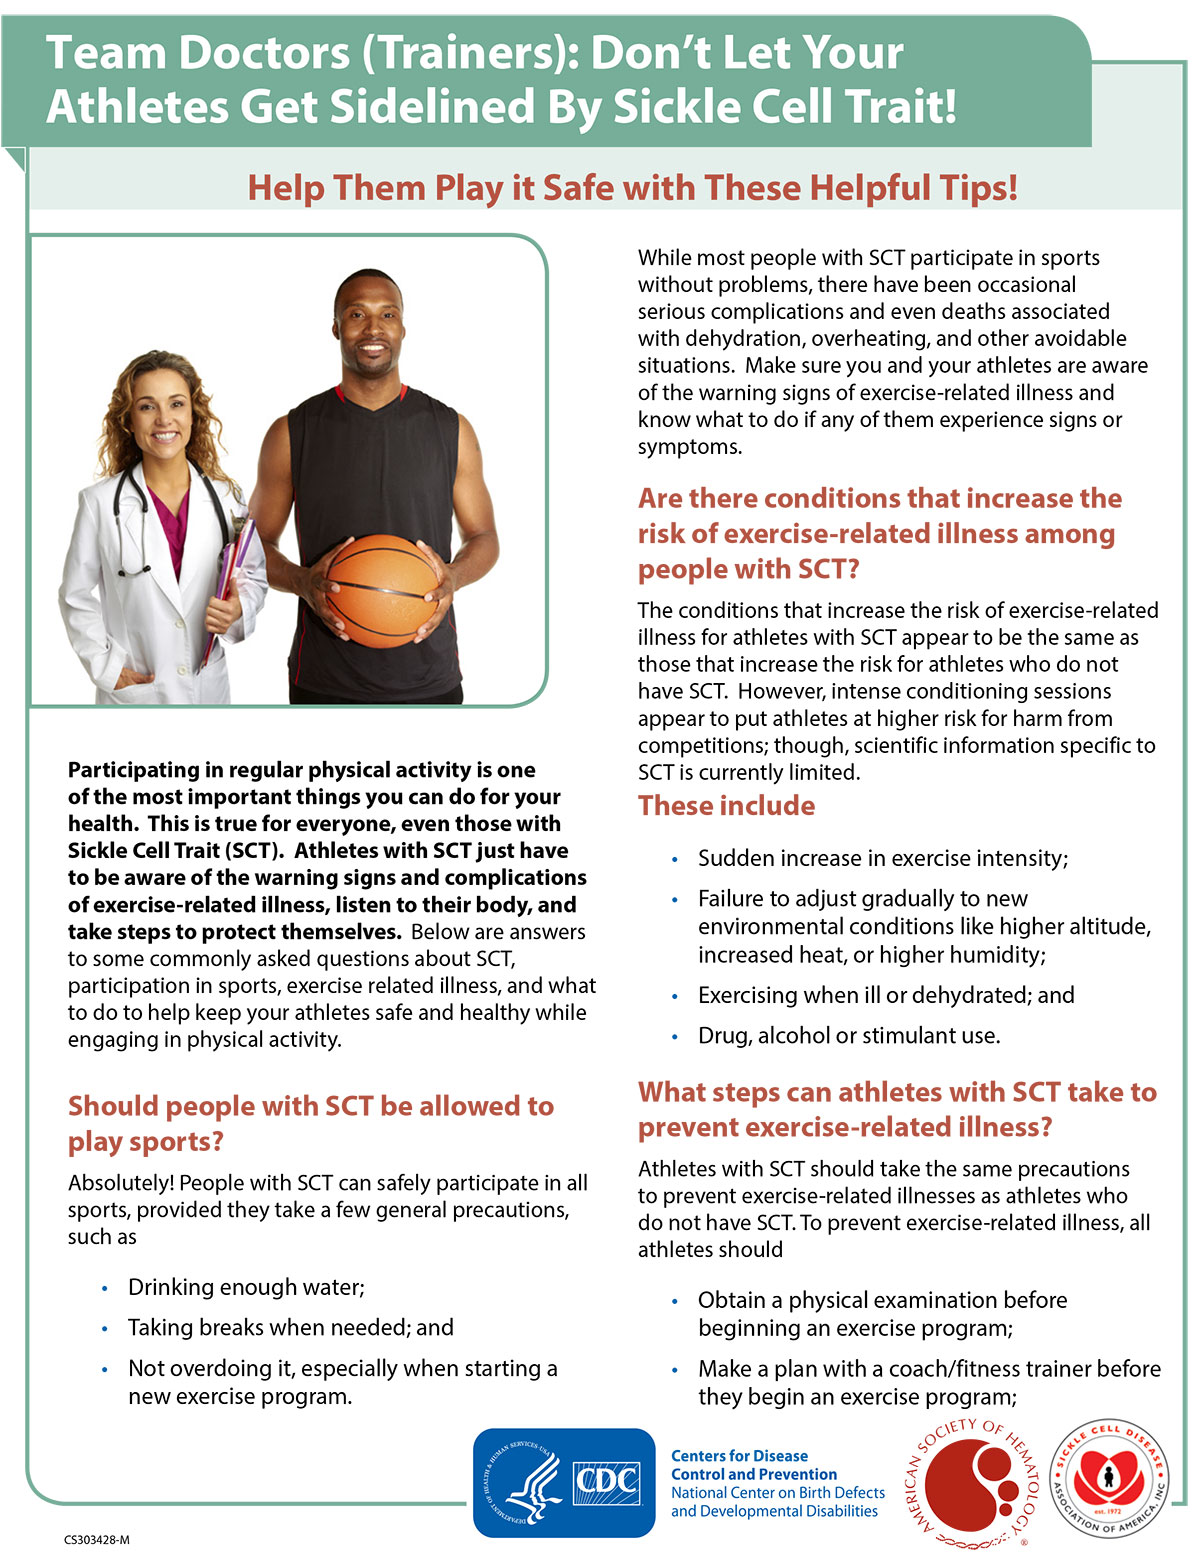 Team Doctors (trainers): Don’t let your athletes get sidelined by sickle cell trait! Help them play it safe with these helpful tips! fact sheet thumbnail